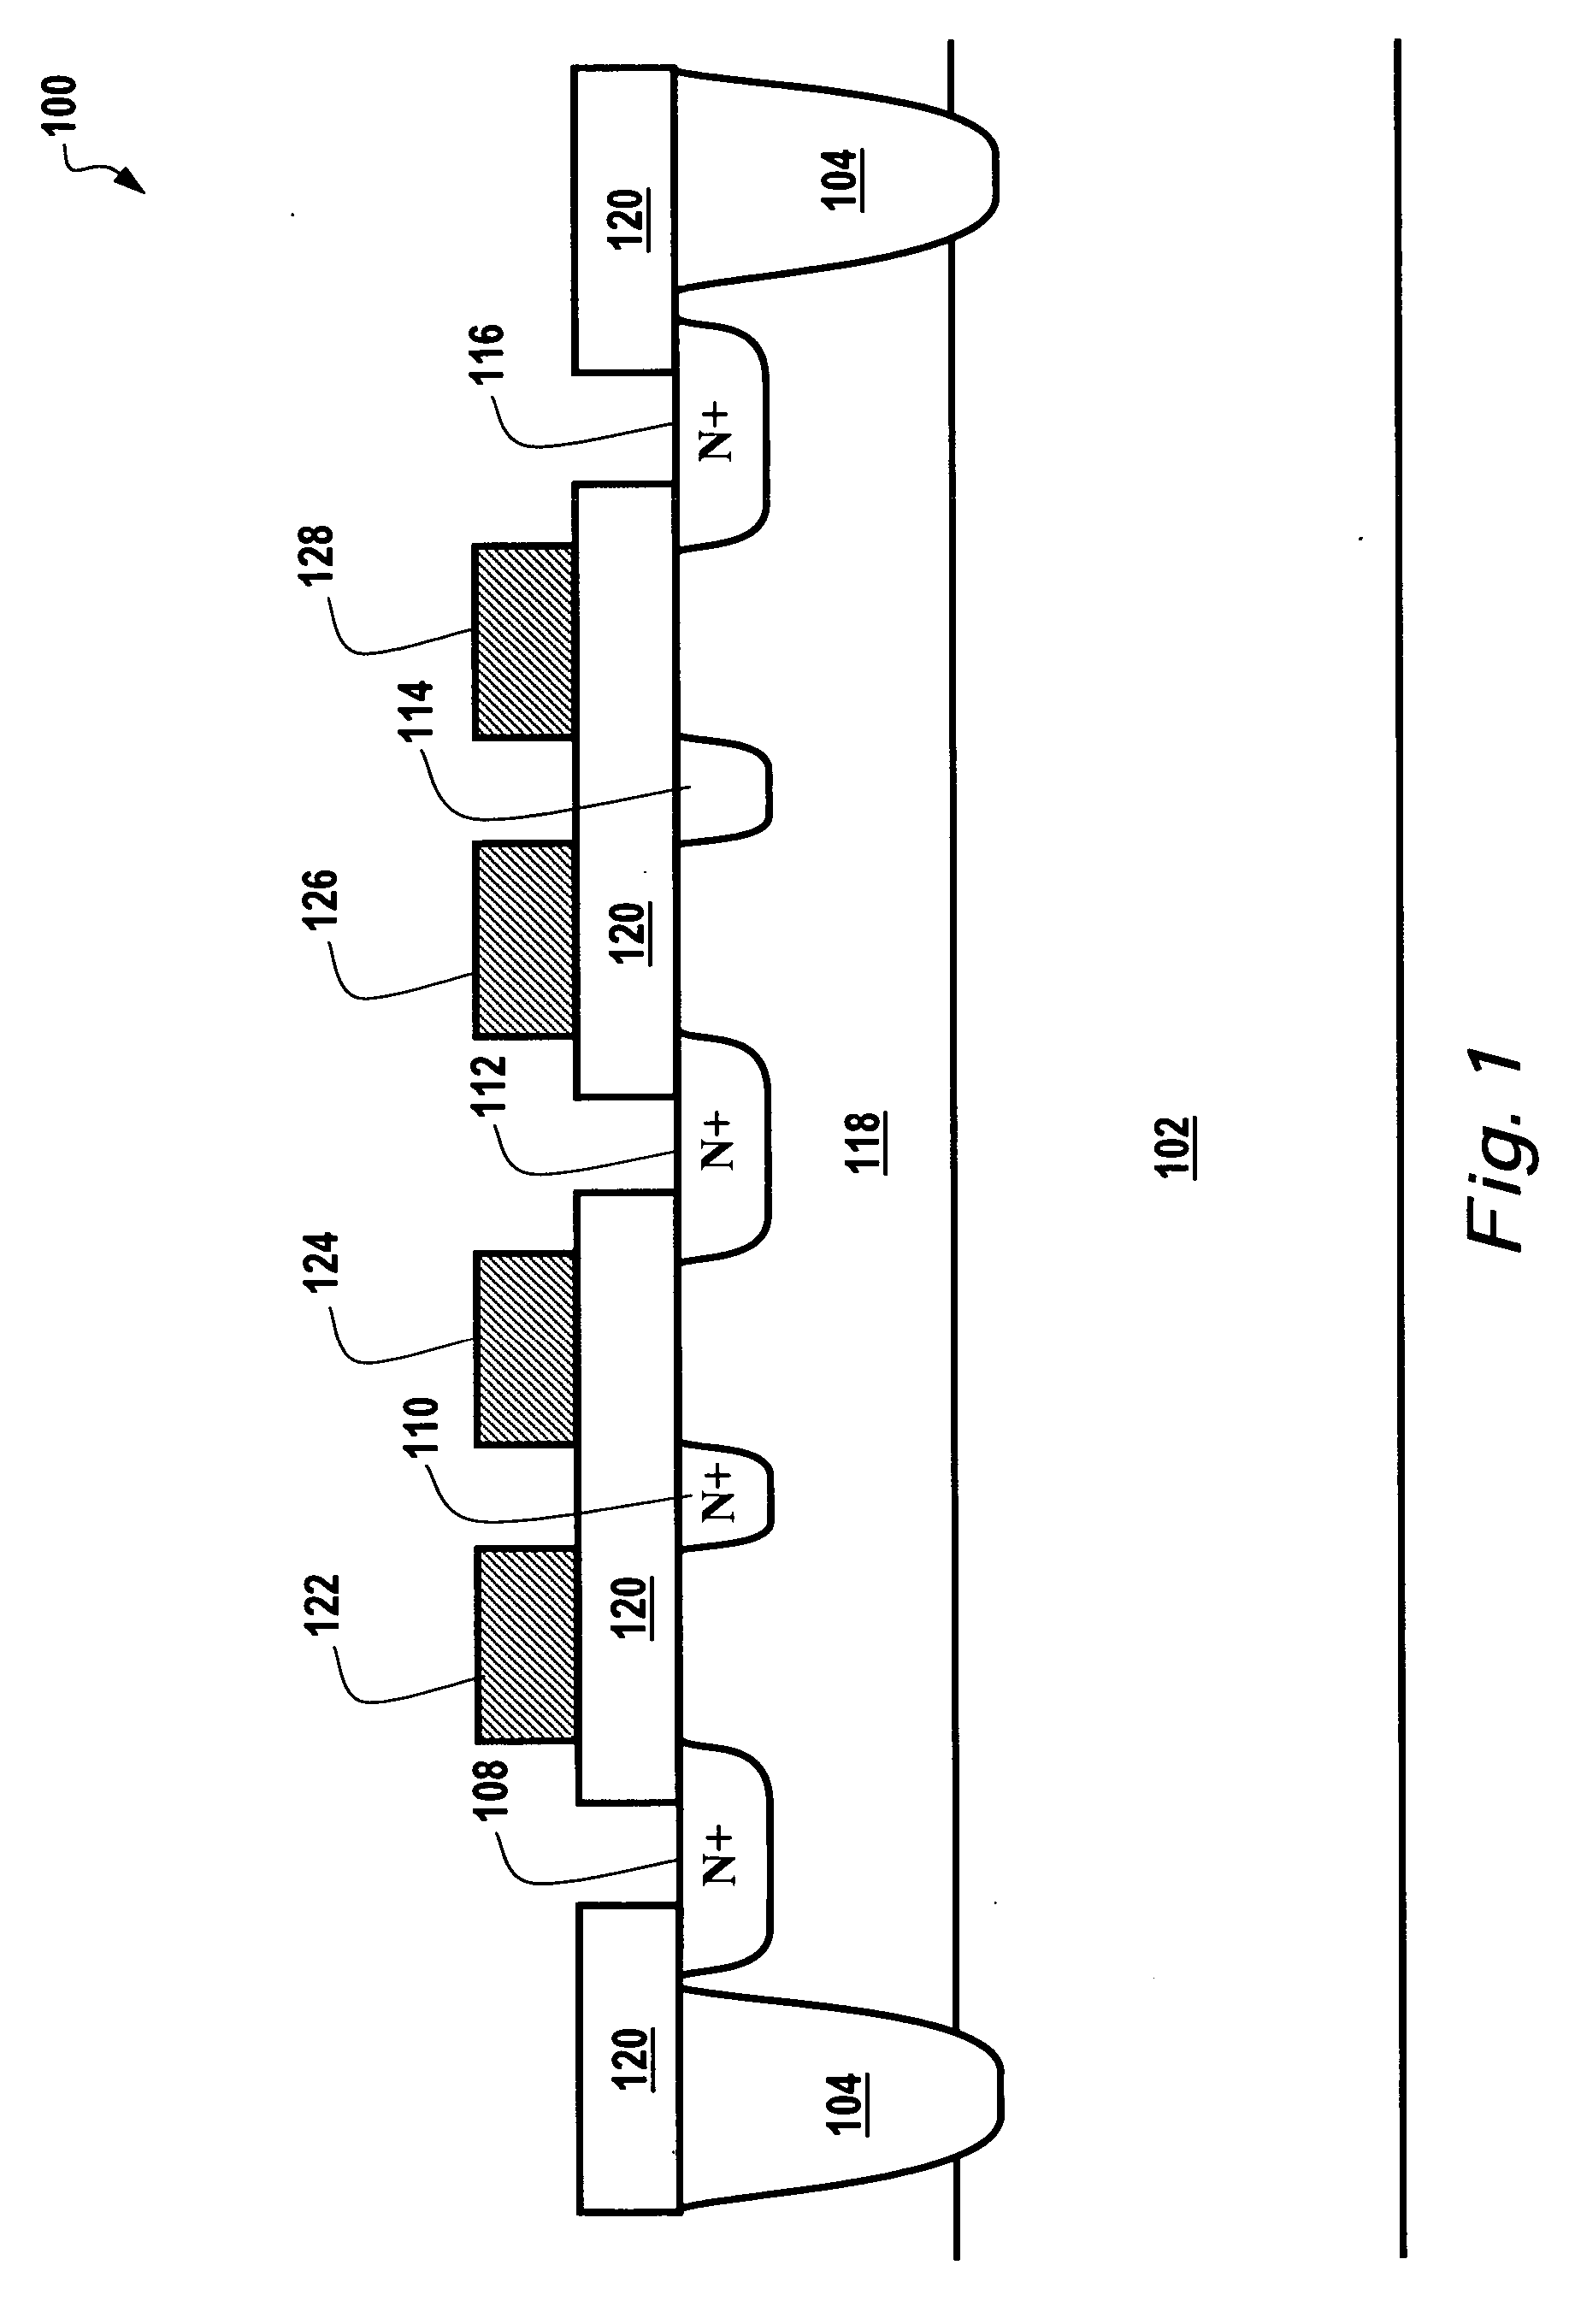 Vertical hall effect device